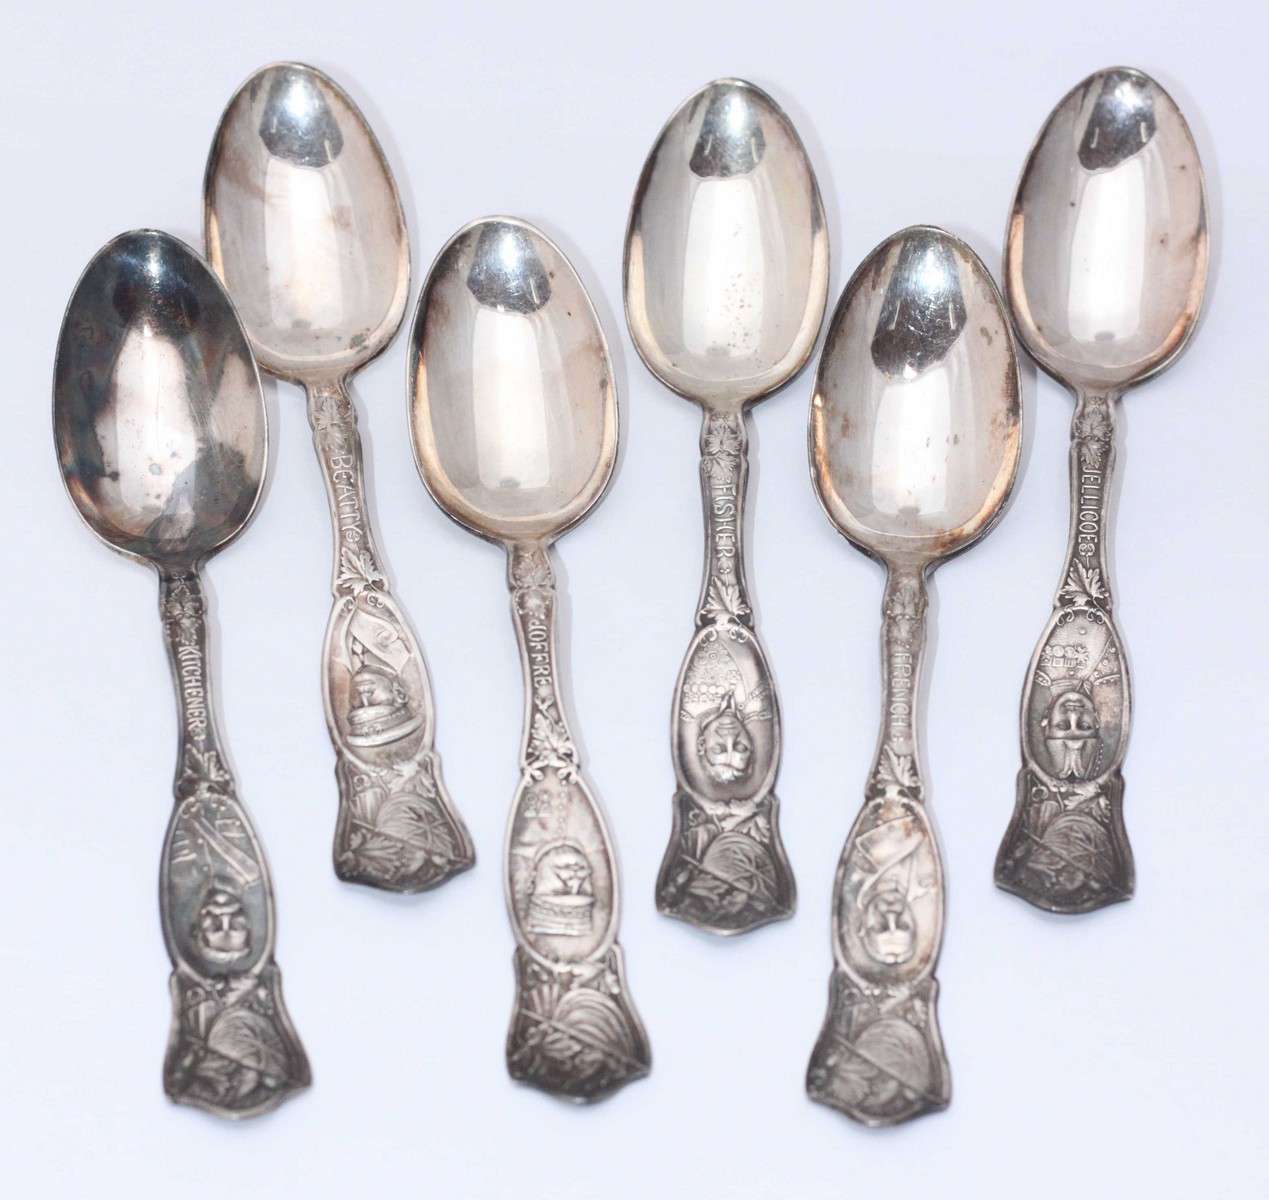 and set of '1881-Rogers' silver-plated tea spoons with handles cast as WW1 military leaders Joffree,